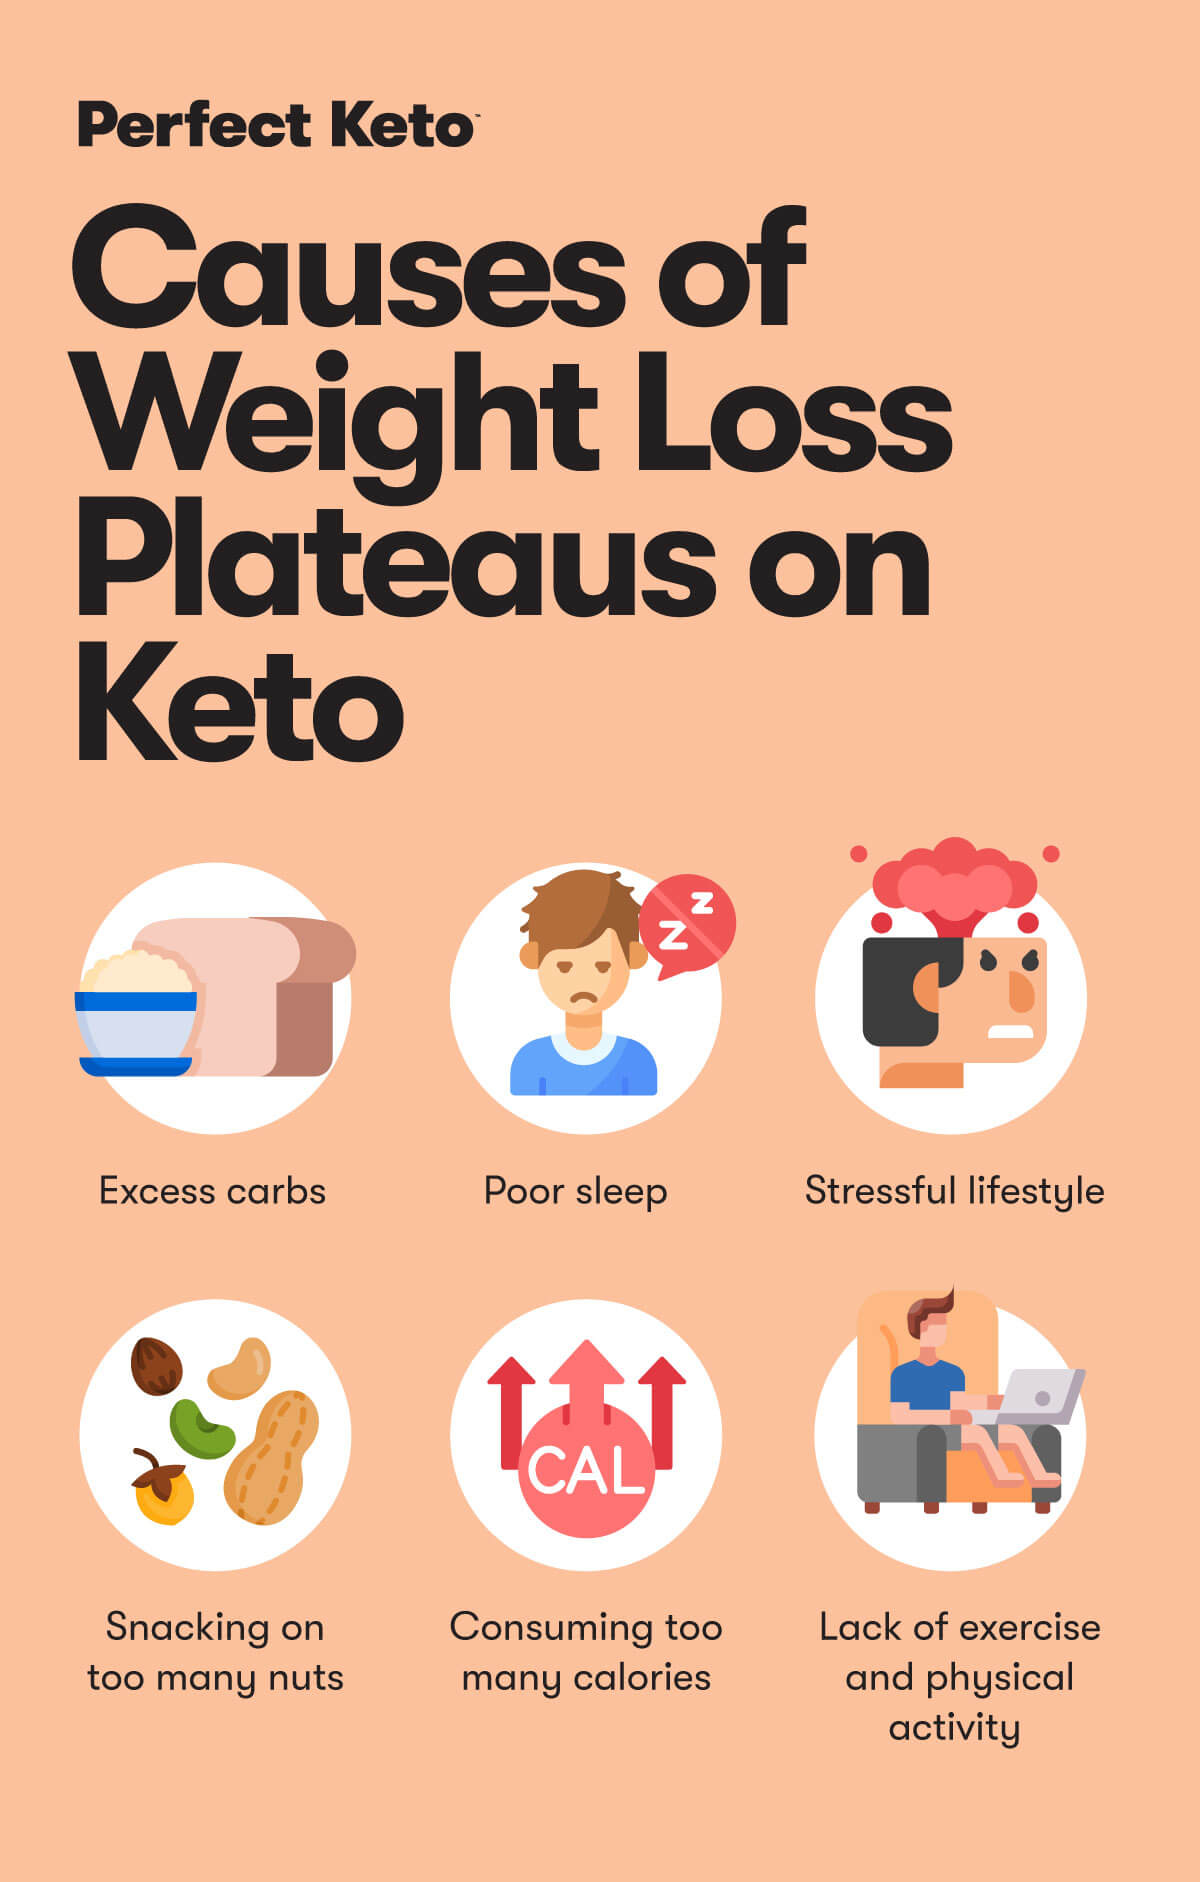 Causes of Weight Loss Plateaus on Keto